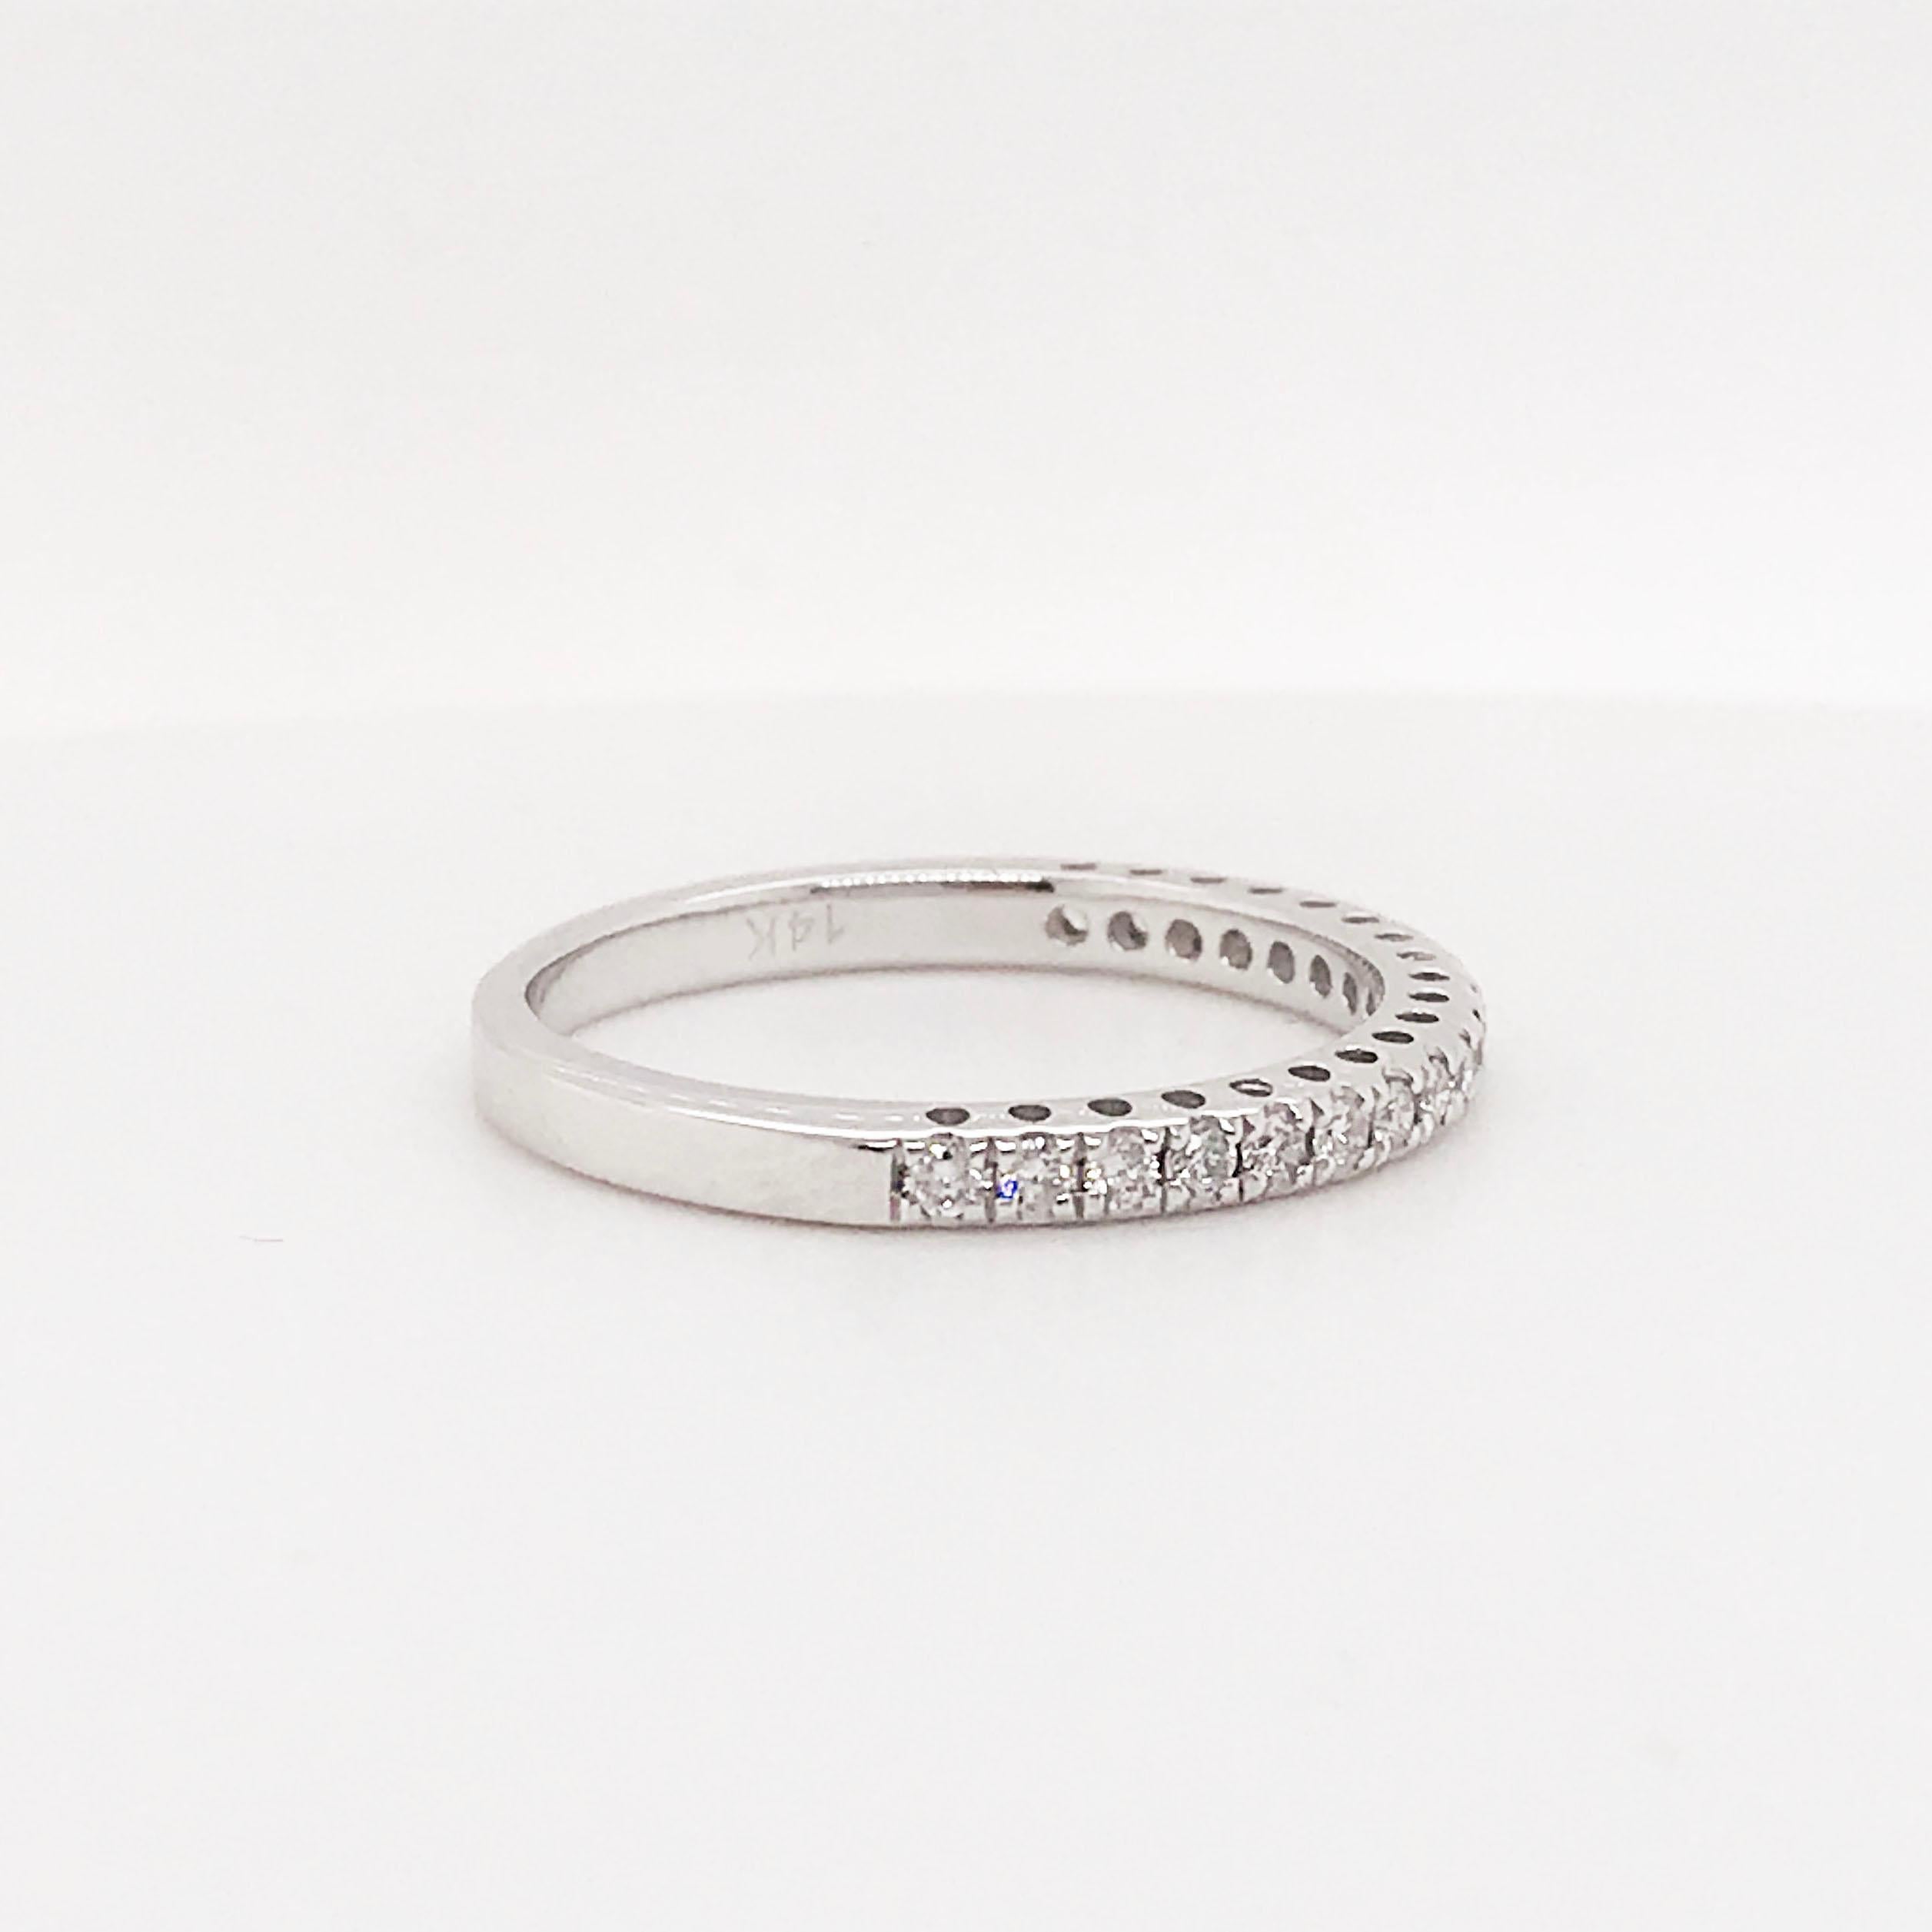 Diamond bands are a classic jewelry staple! Every woman wants one and every women deserves one. This diamond band has round brilliant diamonds going 1/2 around the entire ring. The diamonds are top quality and sparkle brilliantly from every angle.